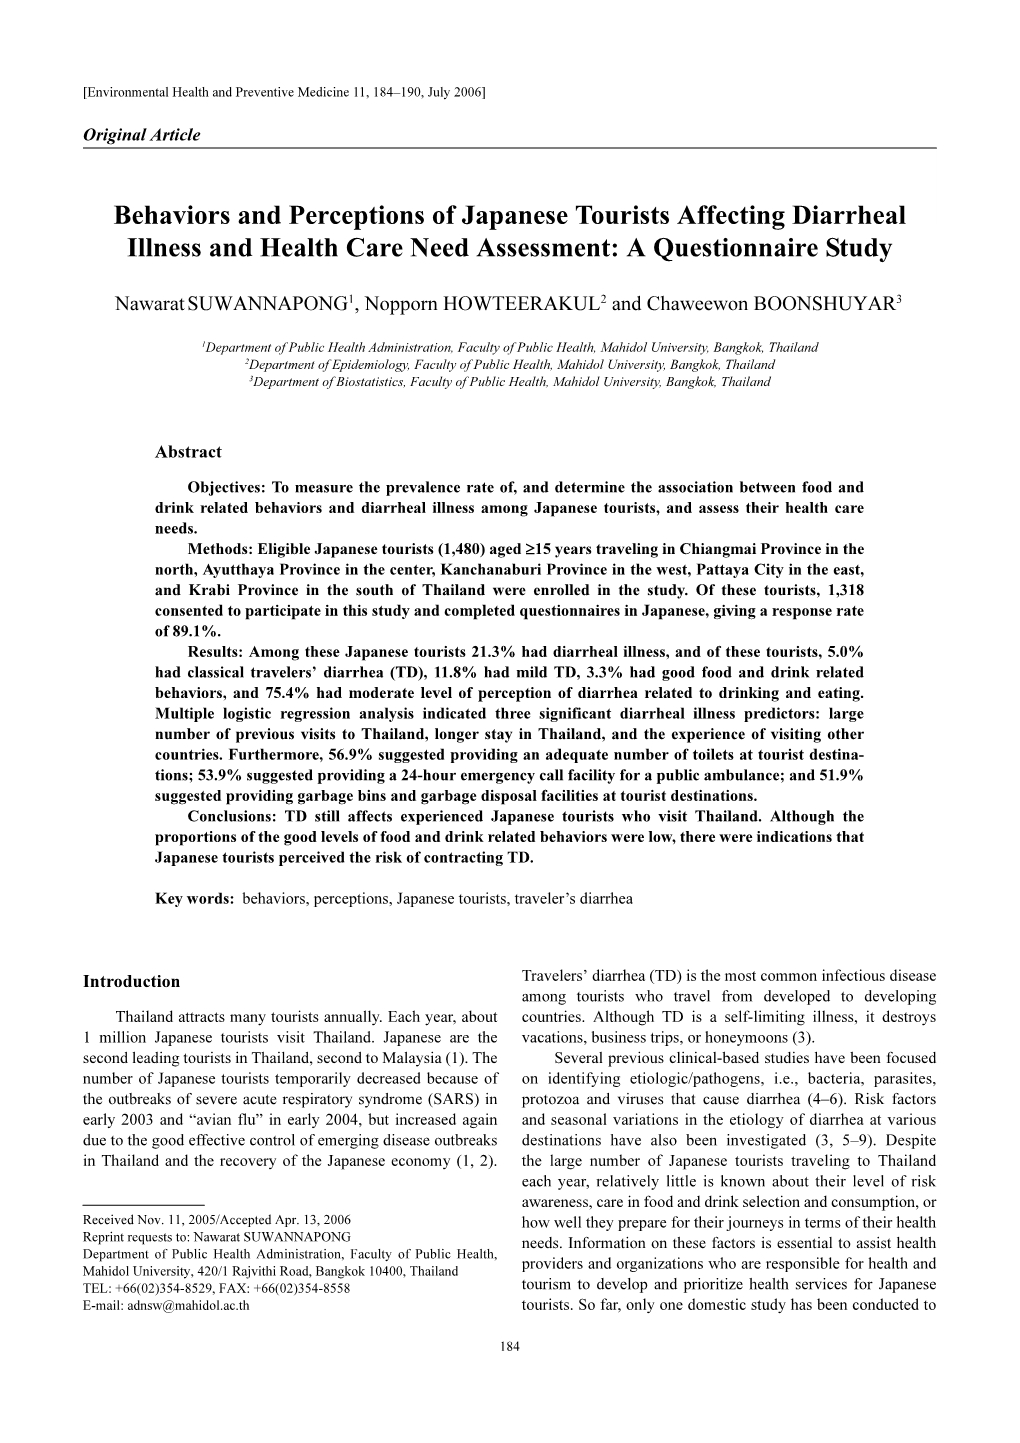 Behaviors and Perceptions of Japanese Tourists Affecting Diarrheal Illness and Health Care Need Assessment: a Questionnaire Study